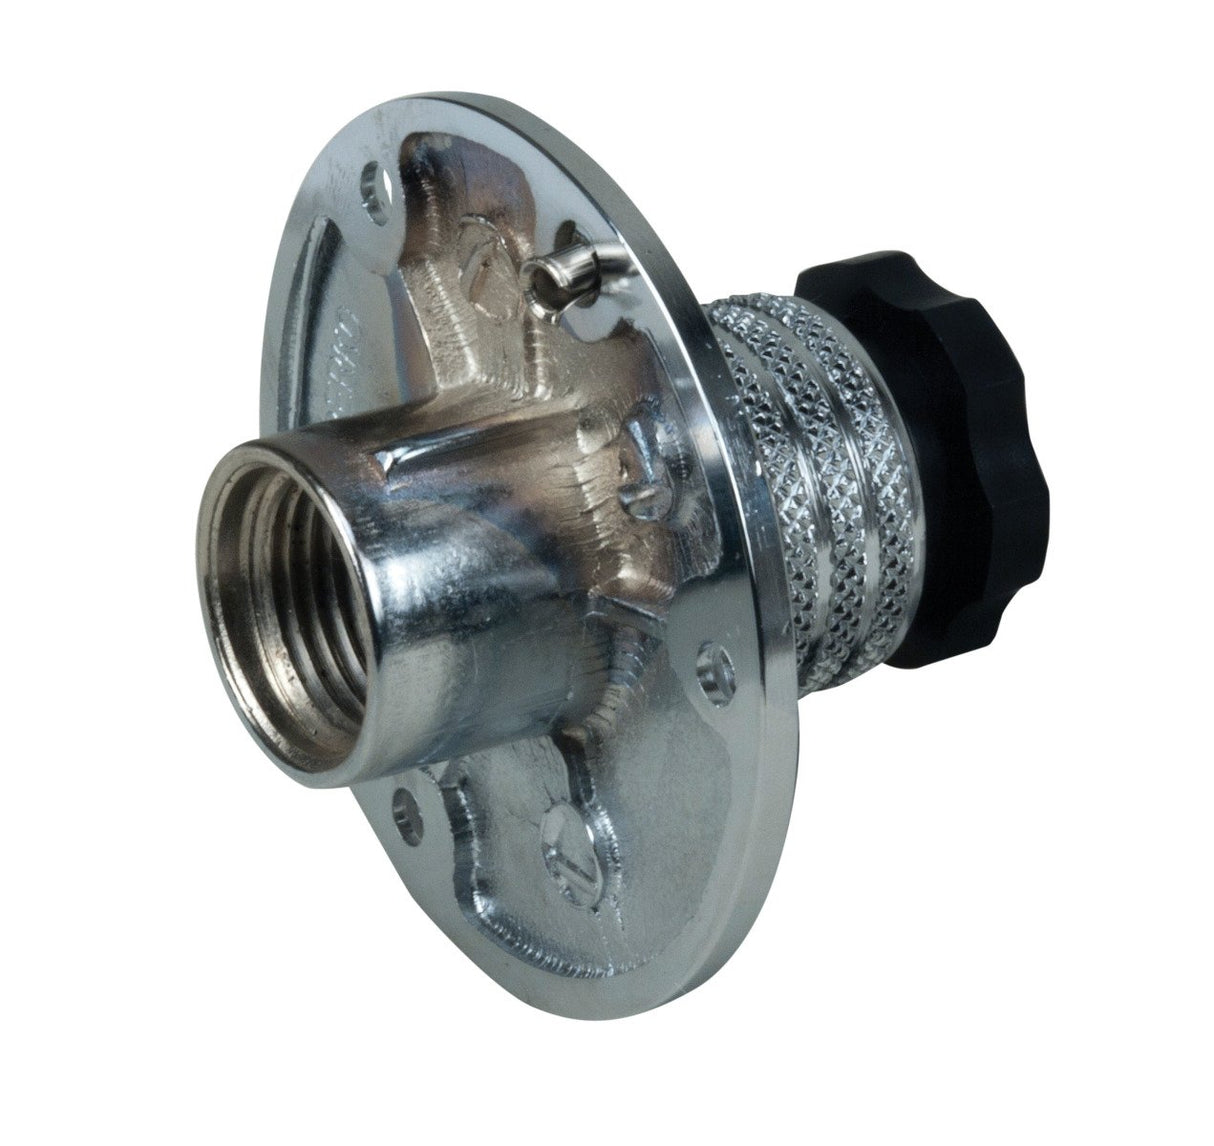 Perko - Water Inlet Fitting with Plug - 0499DP0CHR